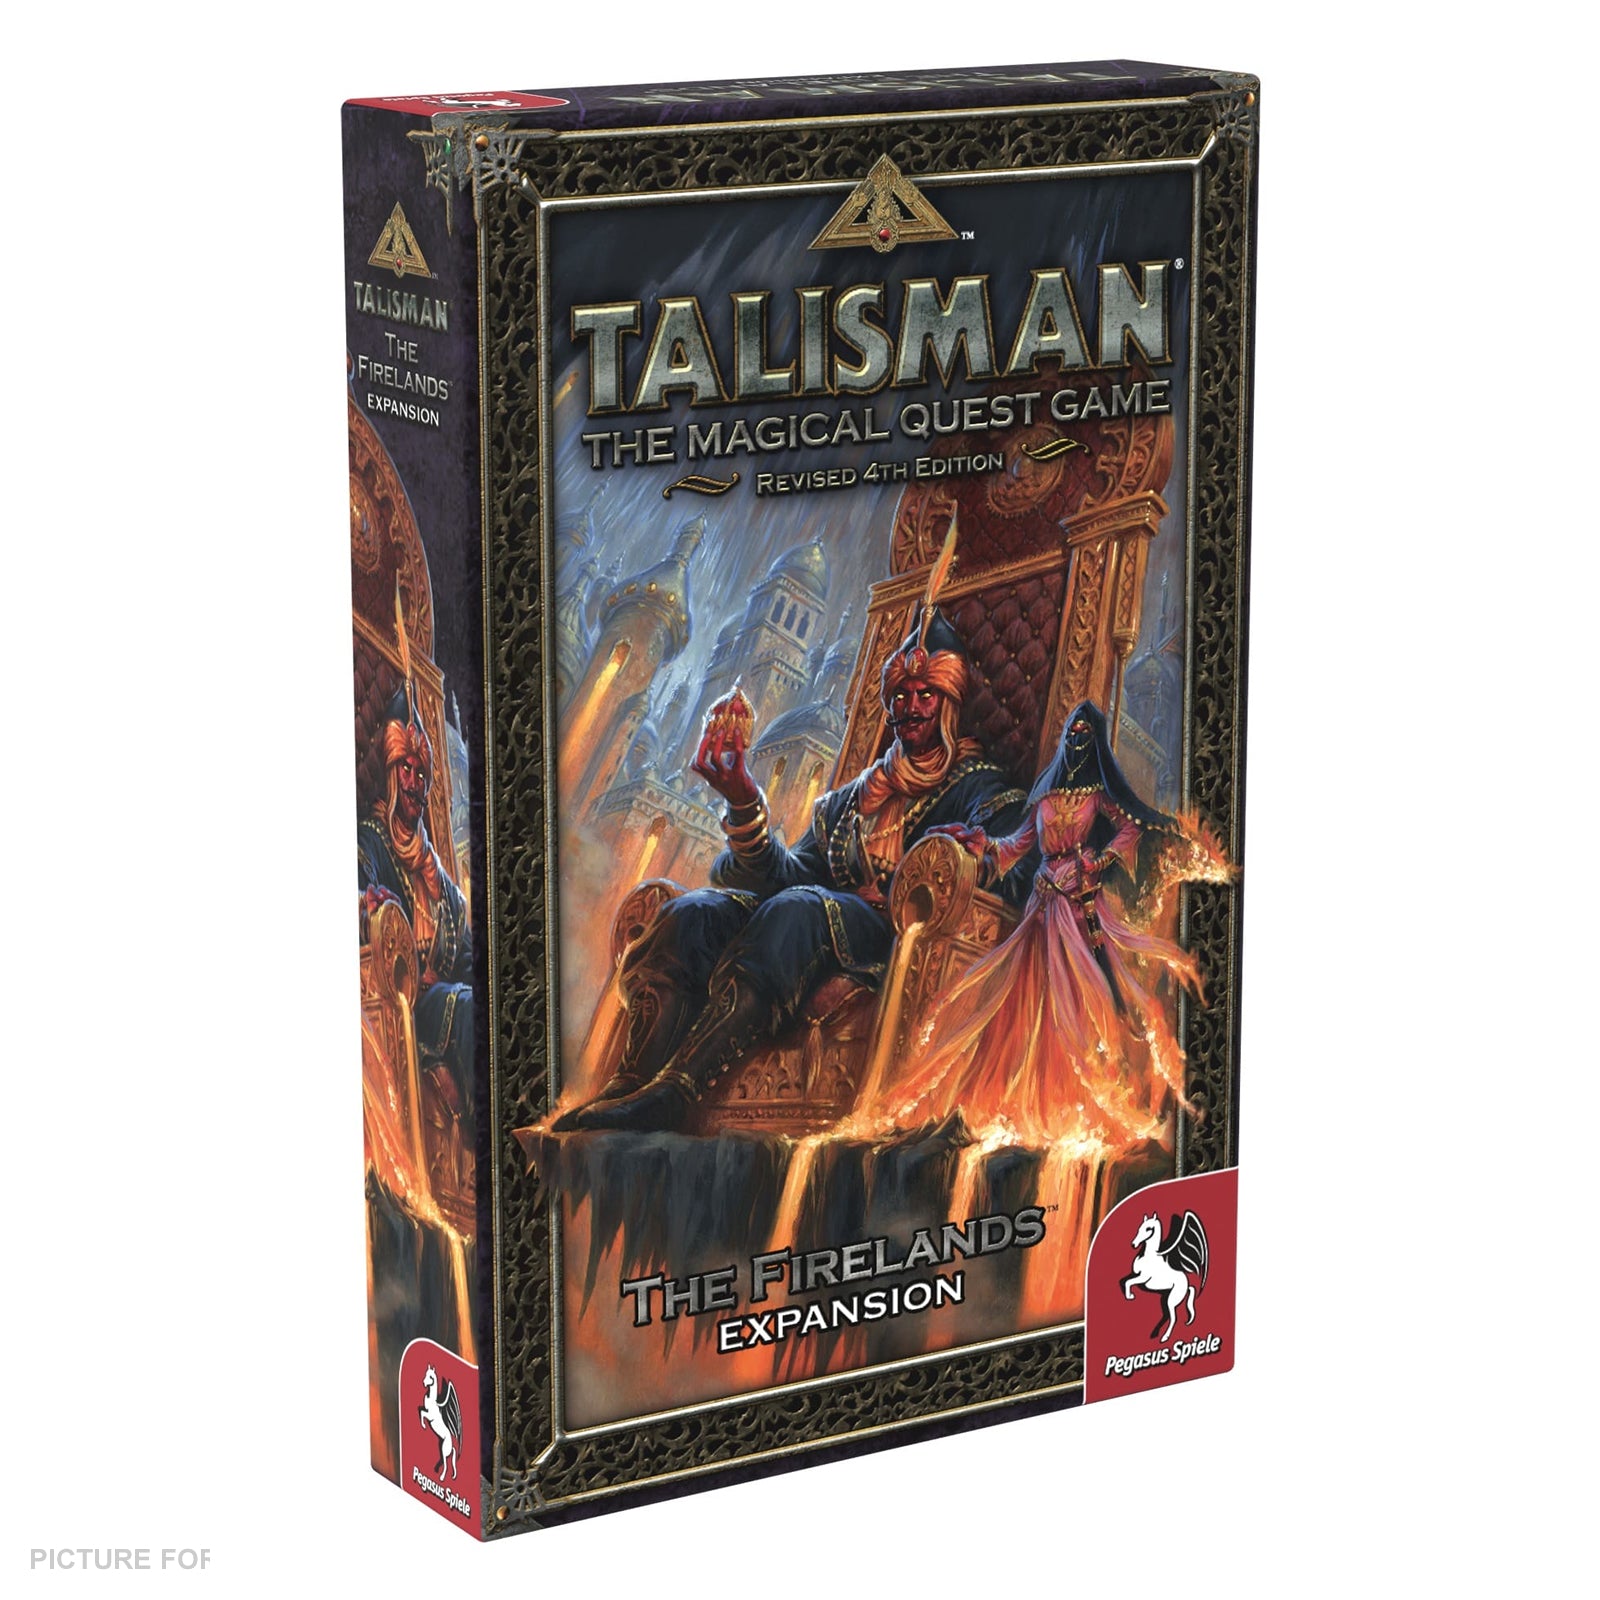 Talisman 4th Edition - THE FIRELANDS Expansion